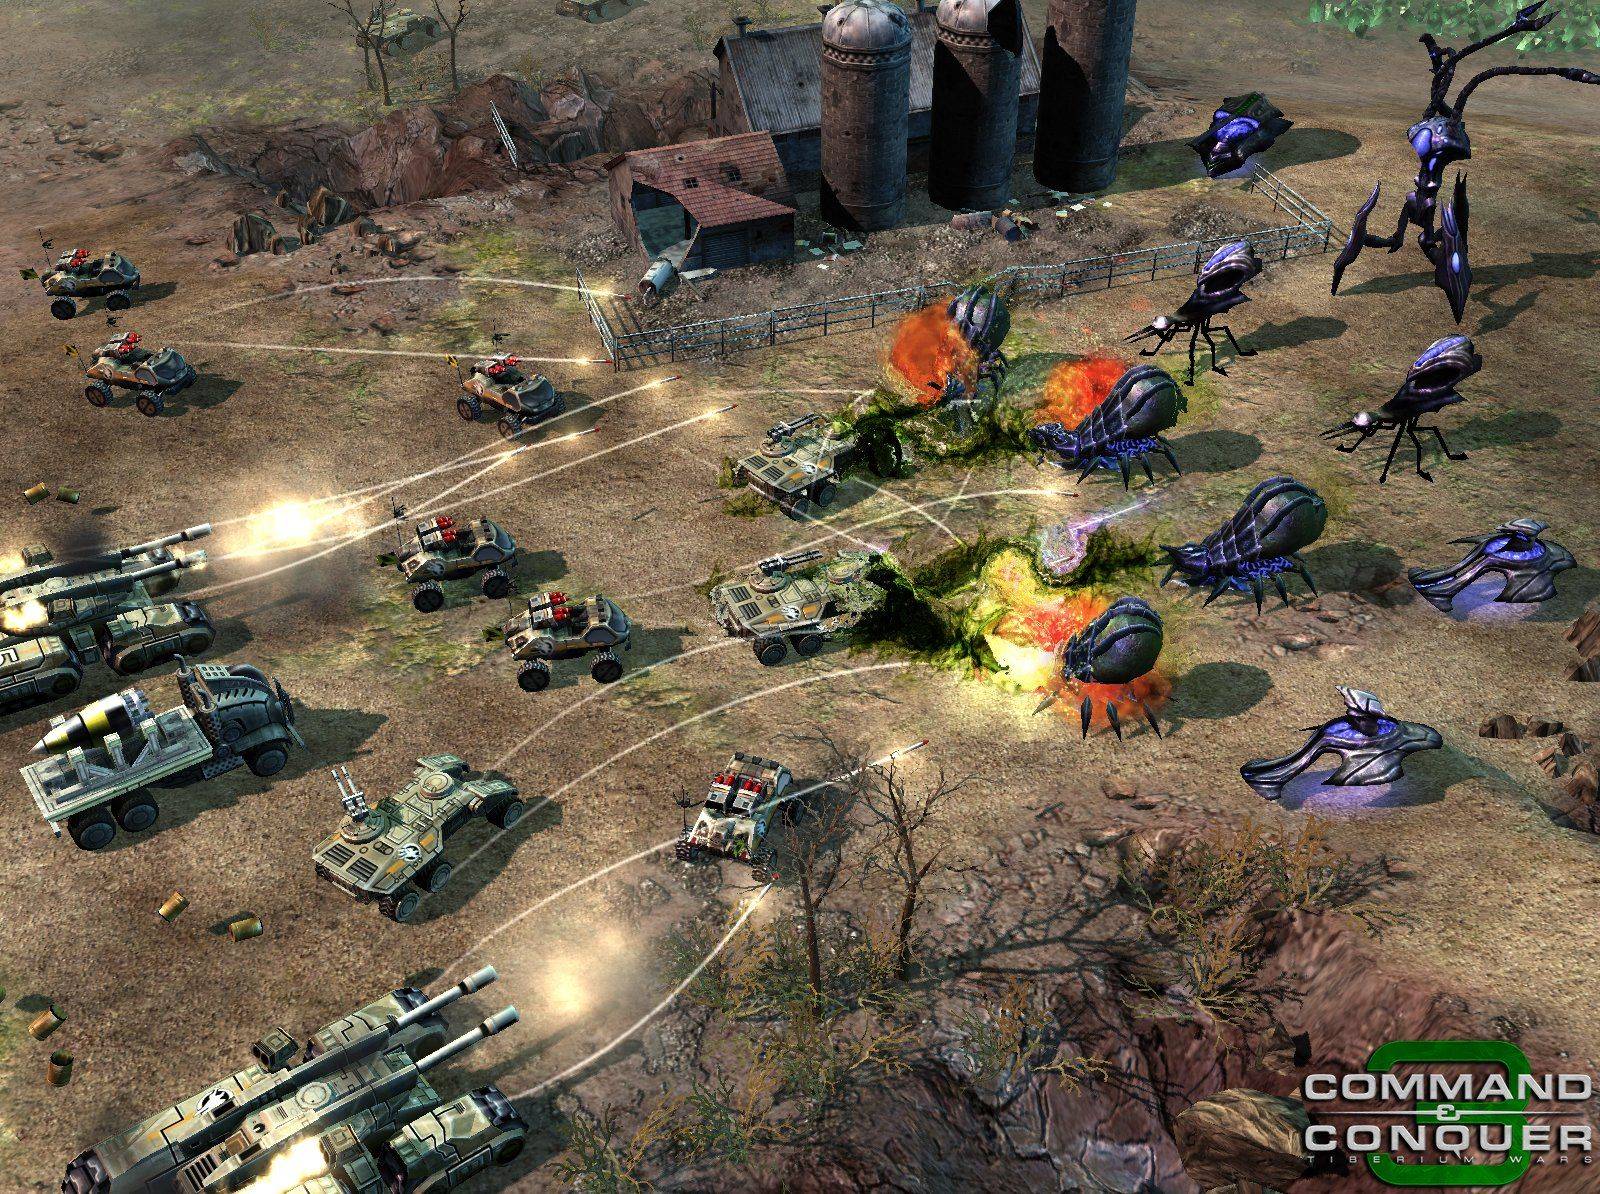 general command and conquer free download windows 7